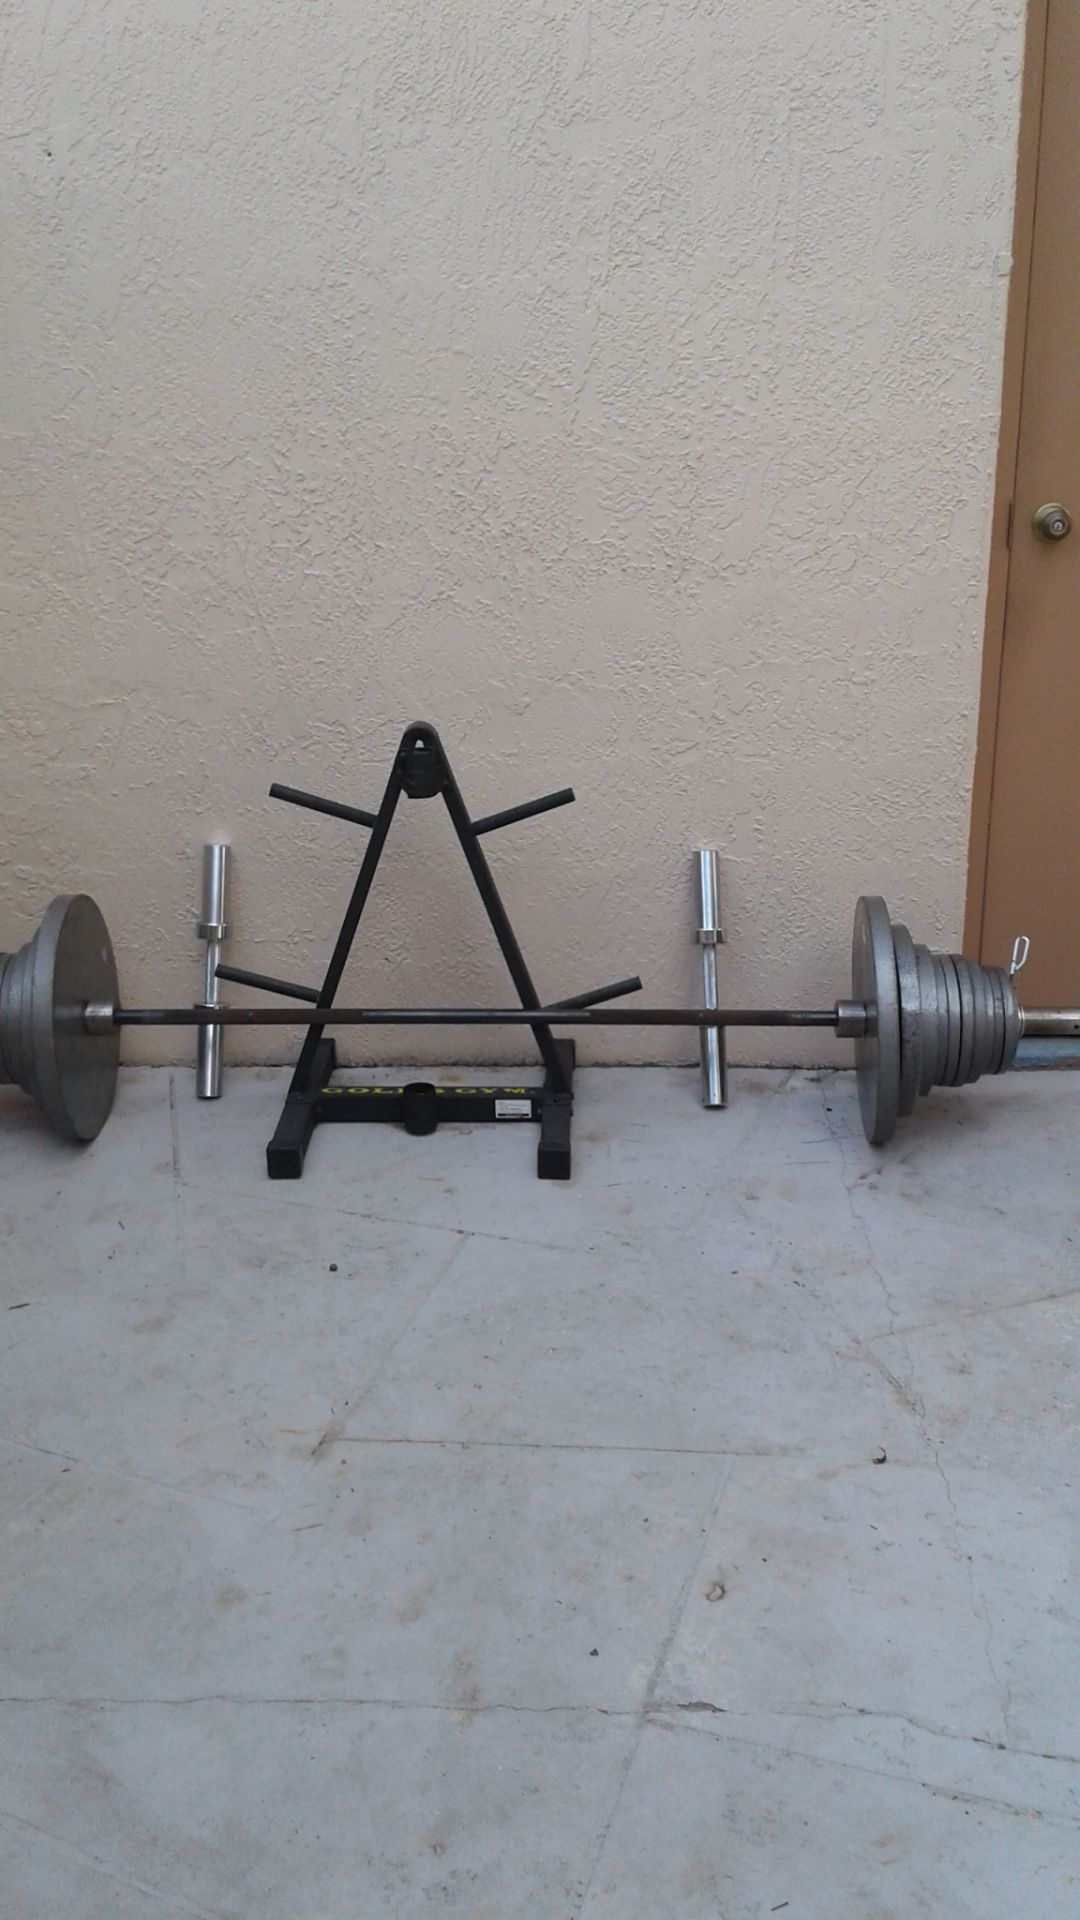 Olympic weight set